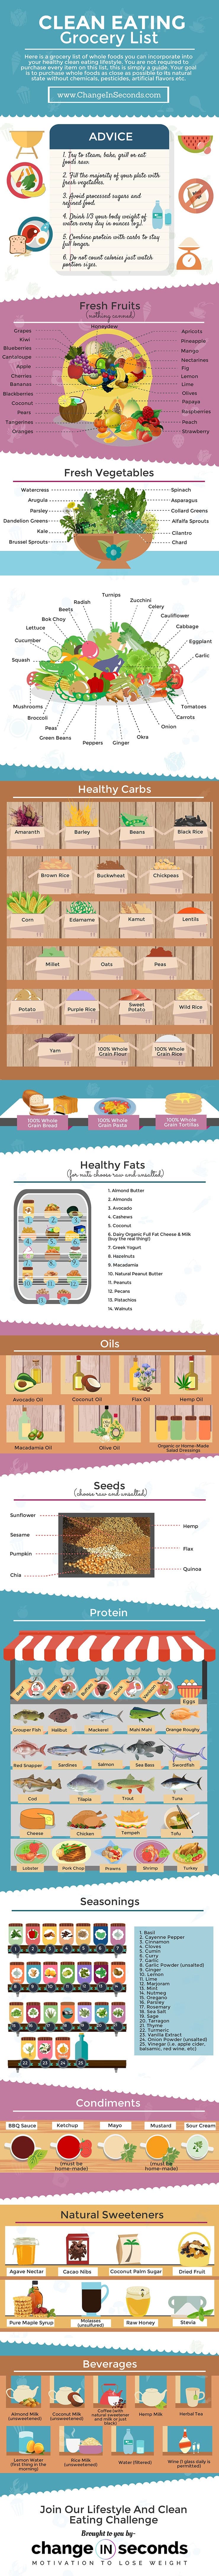 Clean Eating Grocery Shopping List Infographic